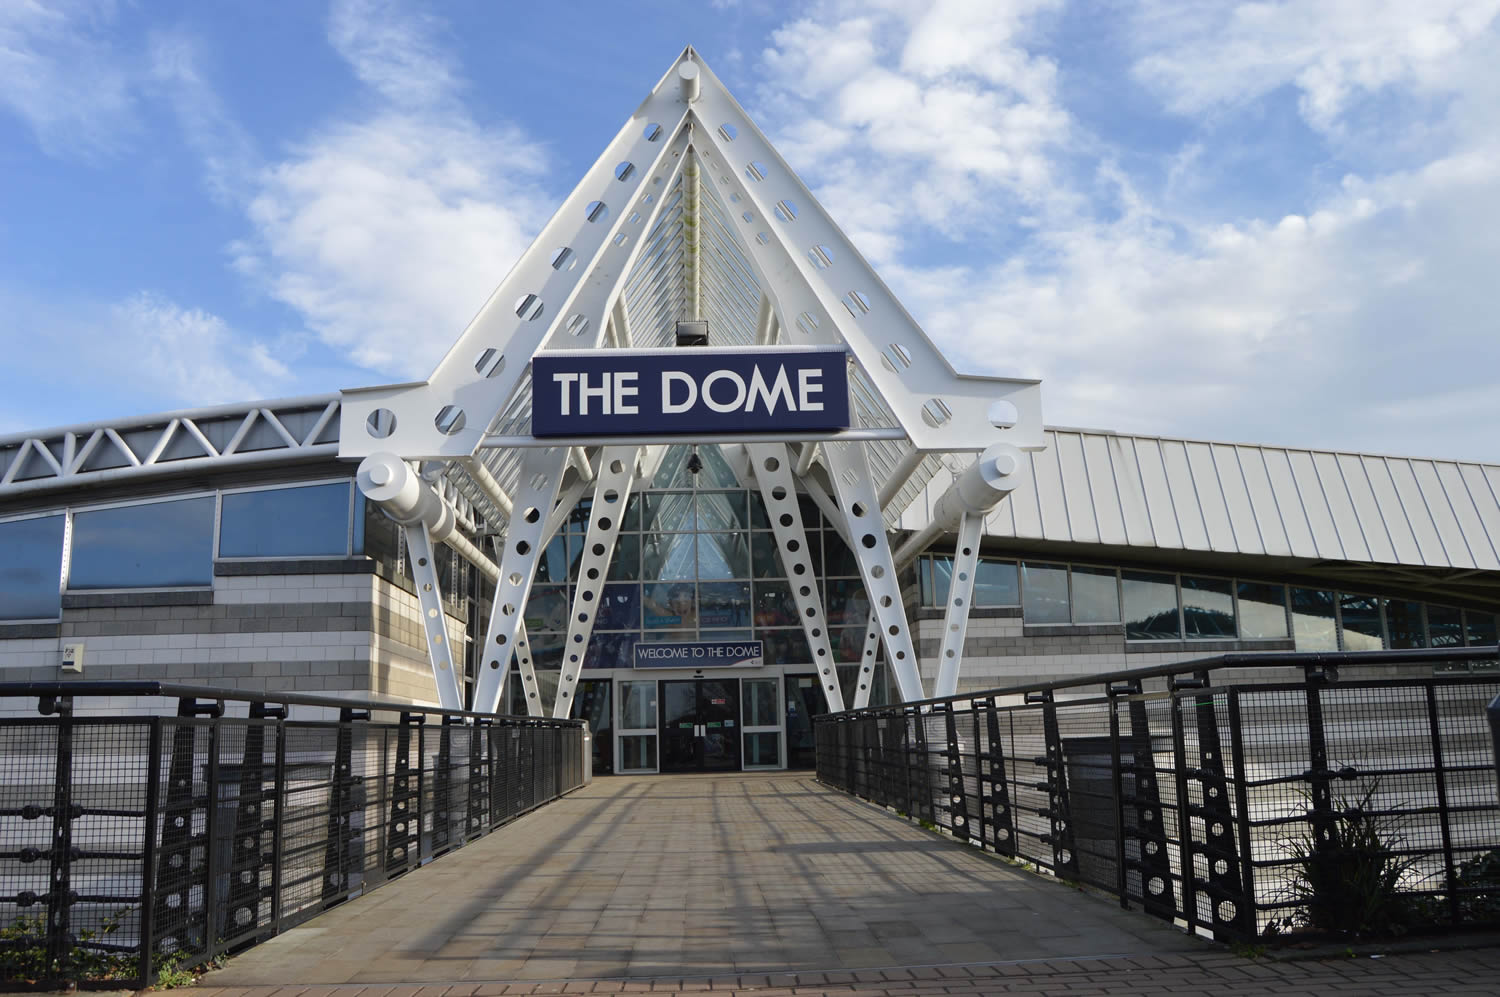 Image name Doncaster Dome the 21 image from the post Major Refurbishment for Doncaster's Premier Leisure Destination: The Dome in Yorkshire.com.